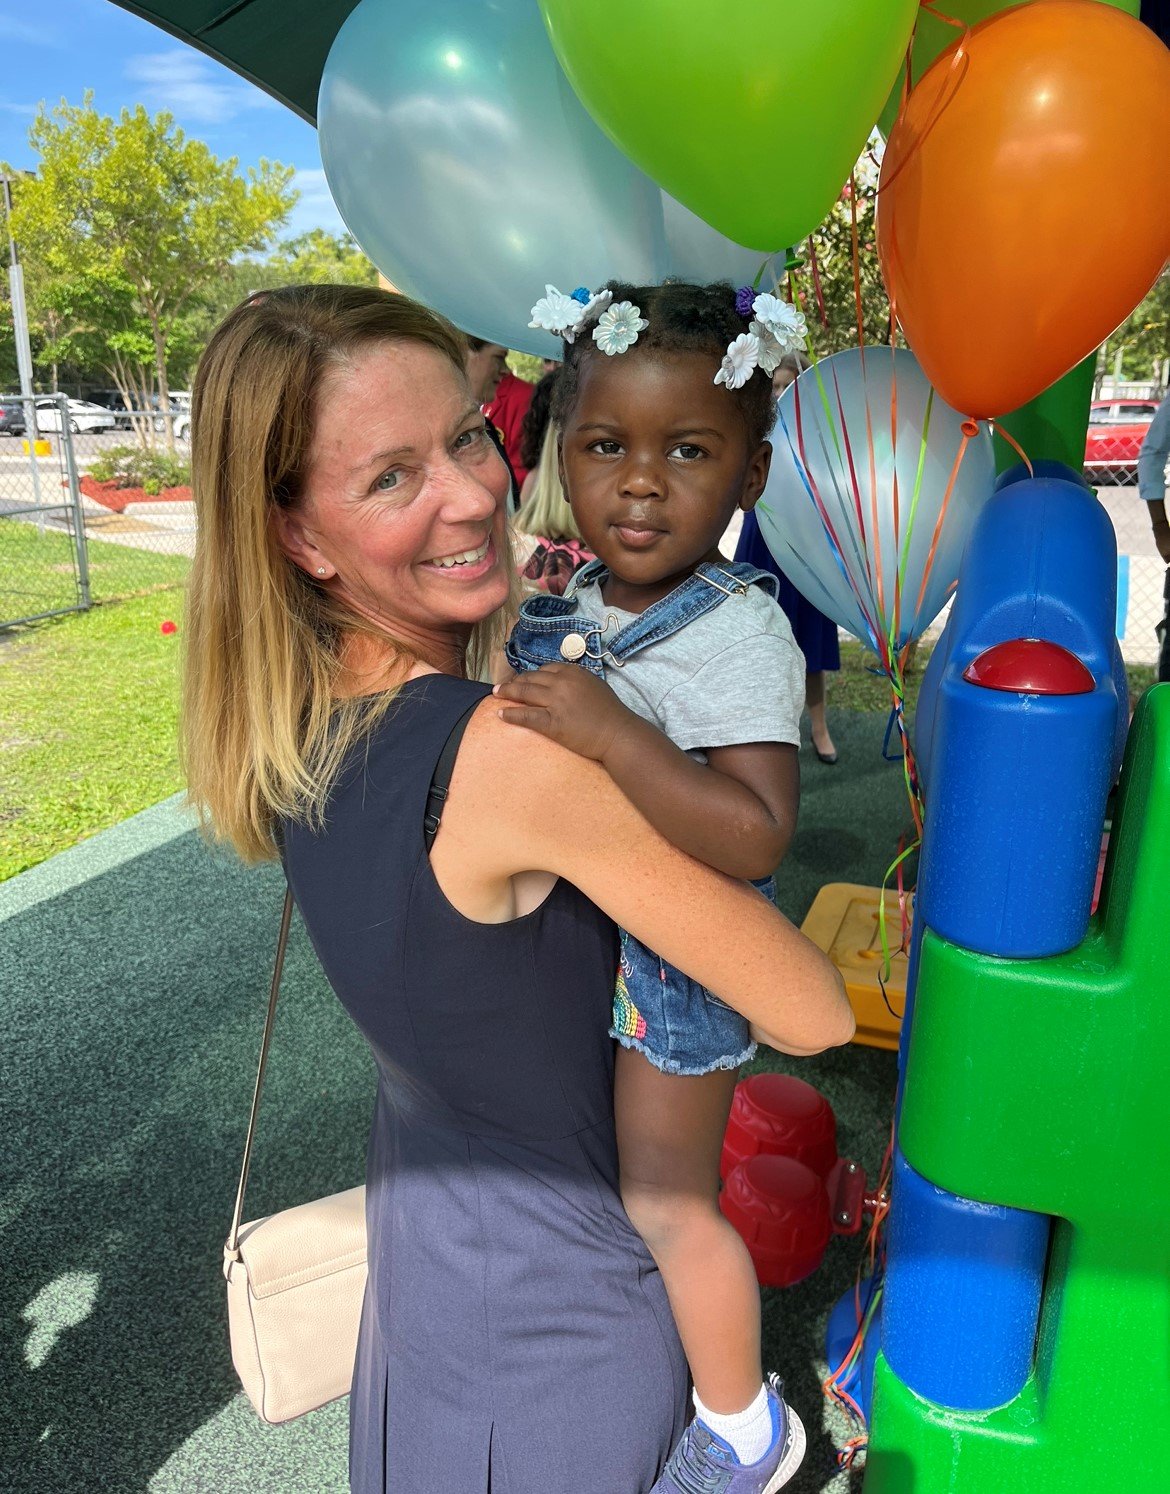 A $25,000 grant to Episcopal Children’s Services from THE PLAYERS Championship supports the organization’s Outdoor Play and Learning Project.